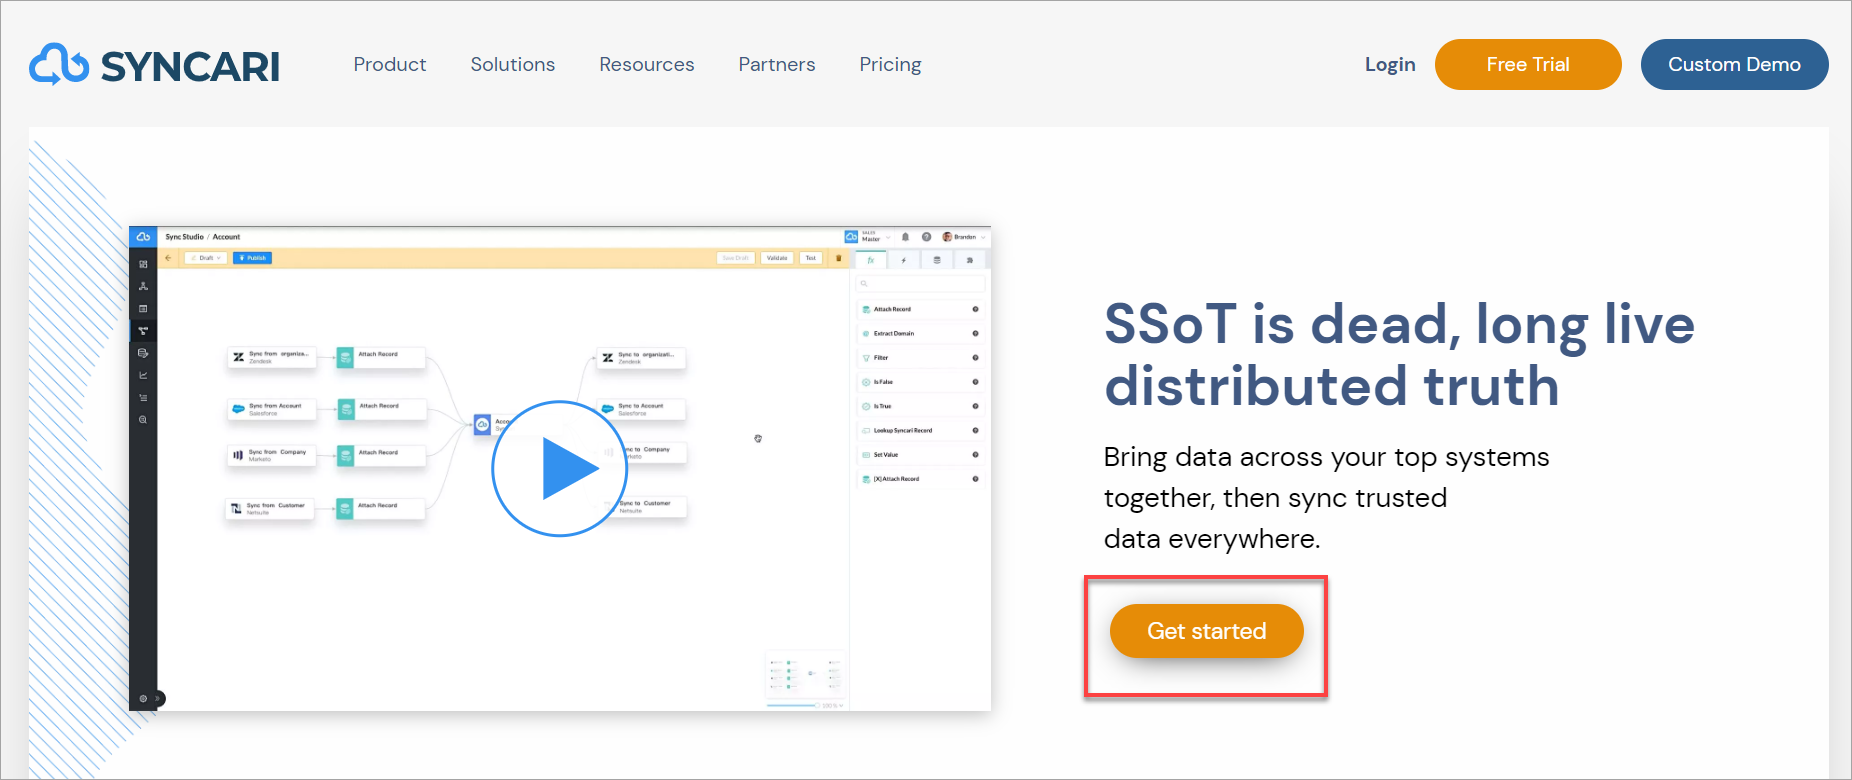 Build scalable database structure, workflows, and format syncs with Syncari. Give mixed resource teams or clients the ability to automate their data more quickly with clicks rather than coding.